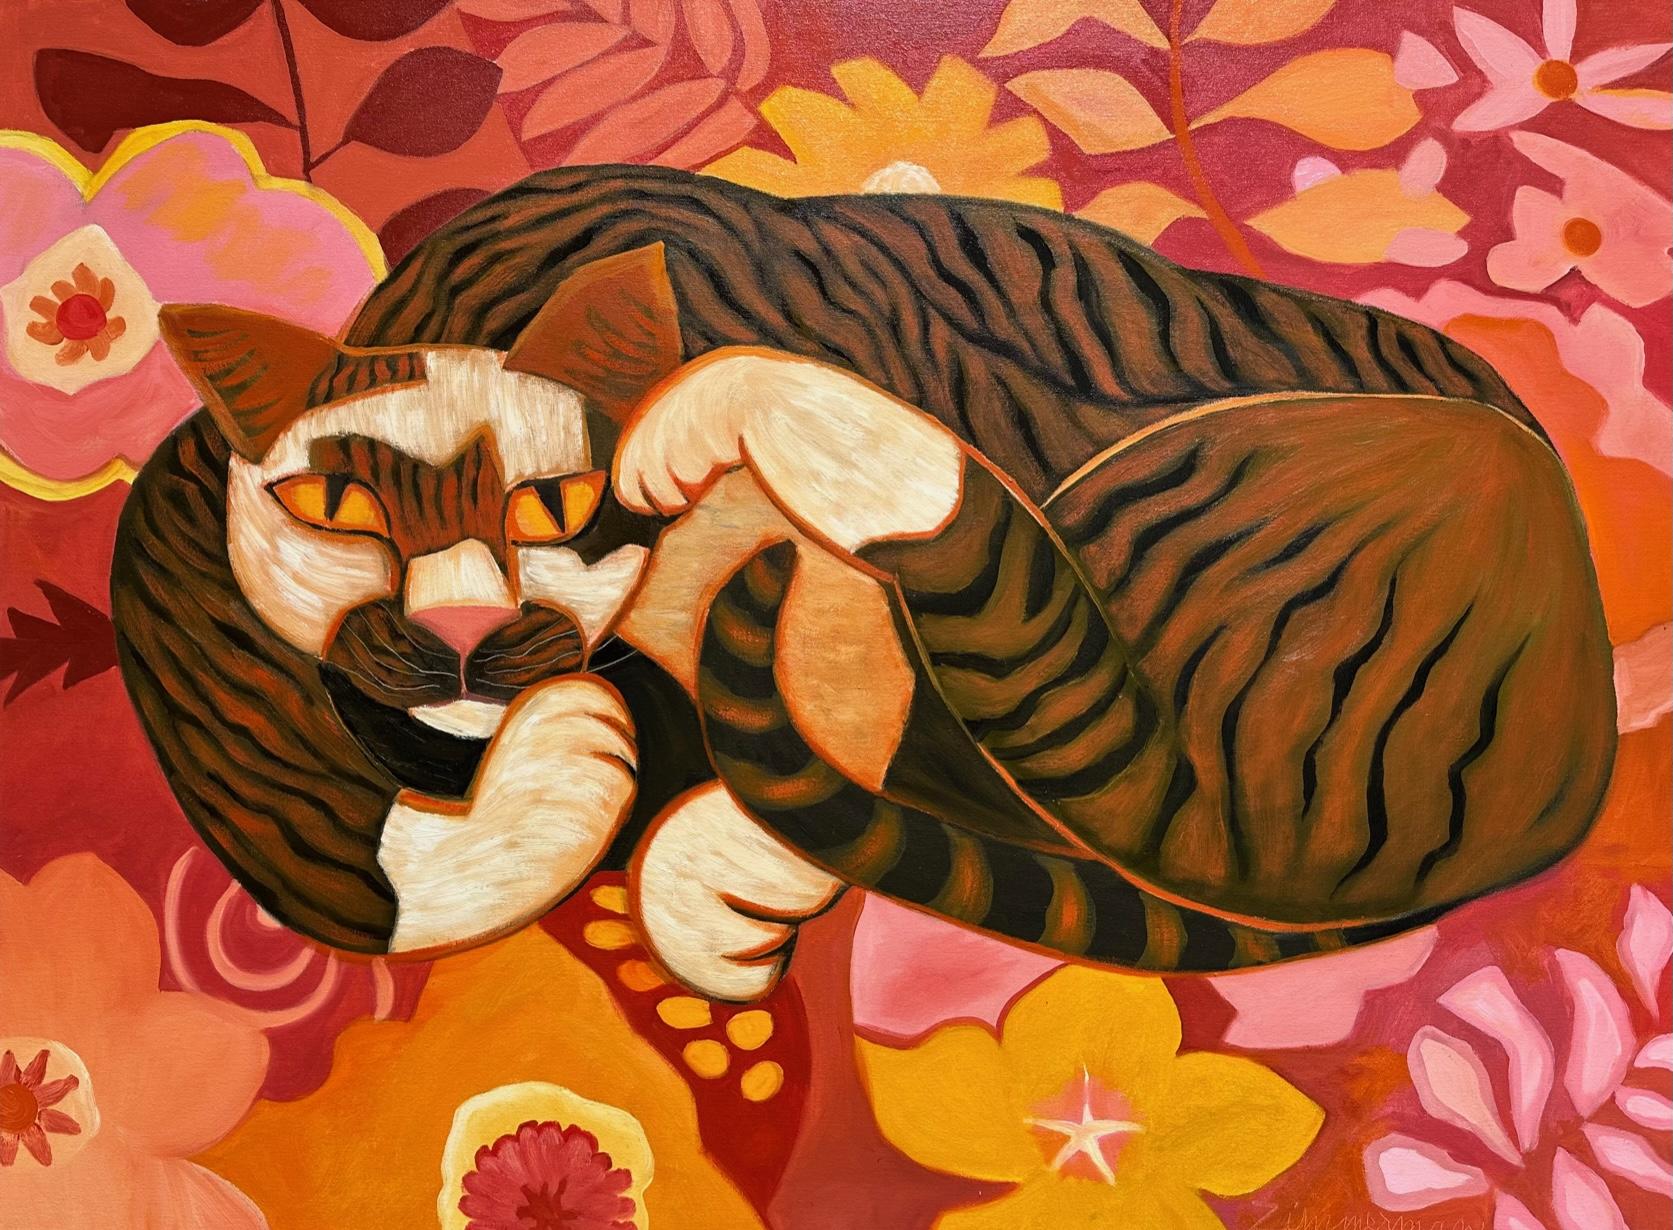 'Tom' is a cheerful and lively painting that captures the playful and curious nature of cats in a beautiful setting.

The bright and vibrant colors of the flowers and cat could make any room feel more energetic and playful, and the cute and adorable